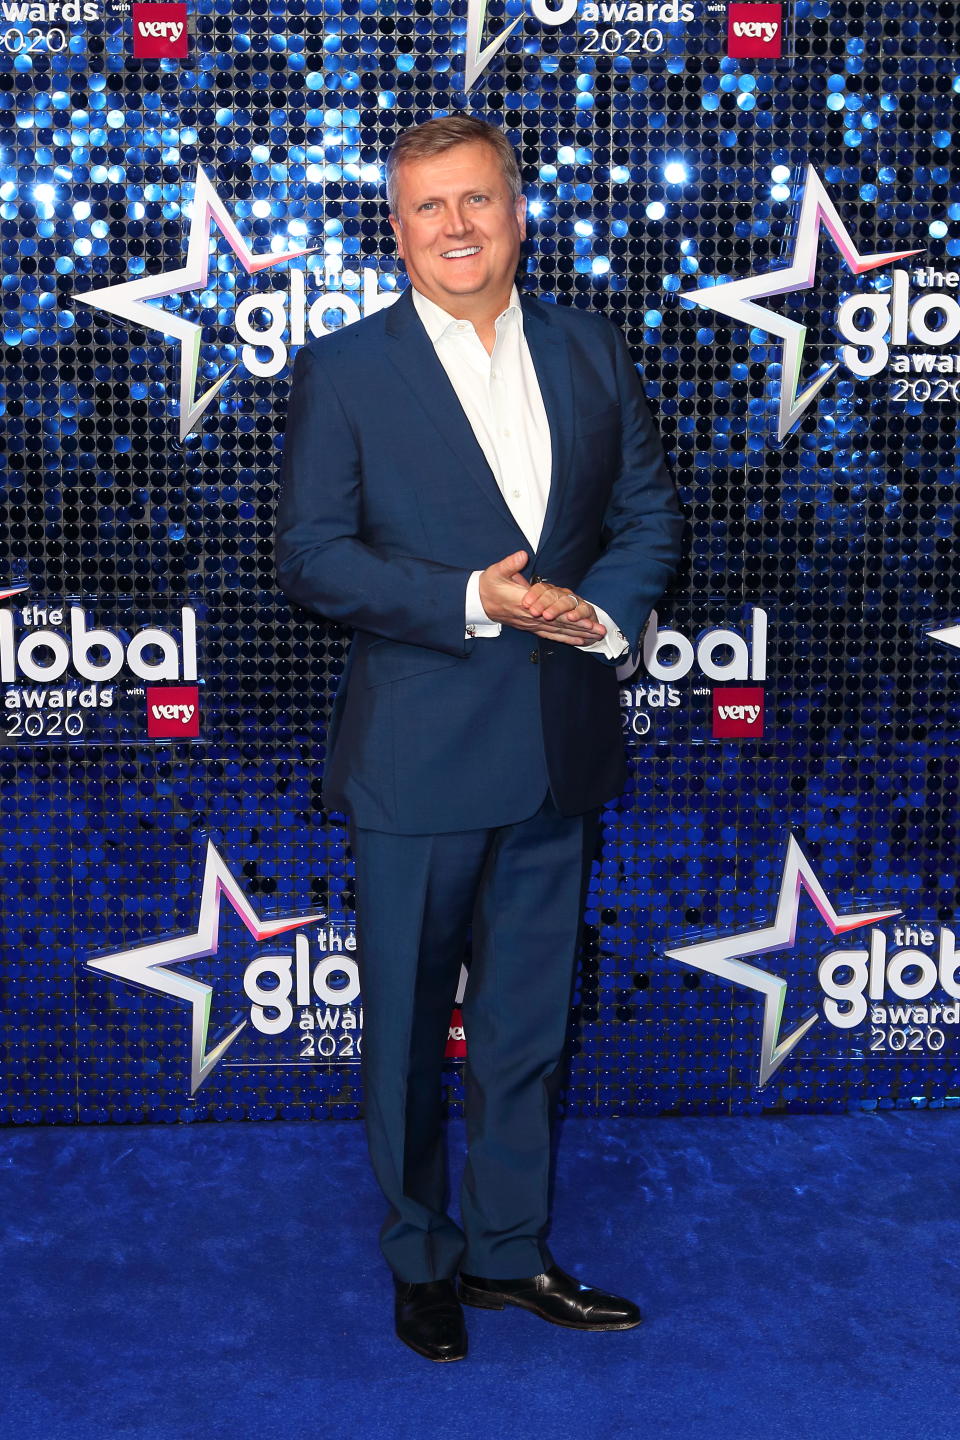 LONDON, UNITED KINGDOM - March 5, 2020 -  Aled Jones arrives at the Global Awards 2020, Hammersmith Apollo, London UK- PHOTOGRAPH BY Jamy / Barcroft Studios / Future Publishing (Photo credit should read Jamy/Barcroft Media via Getty Images)